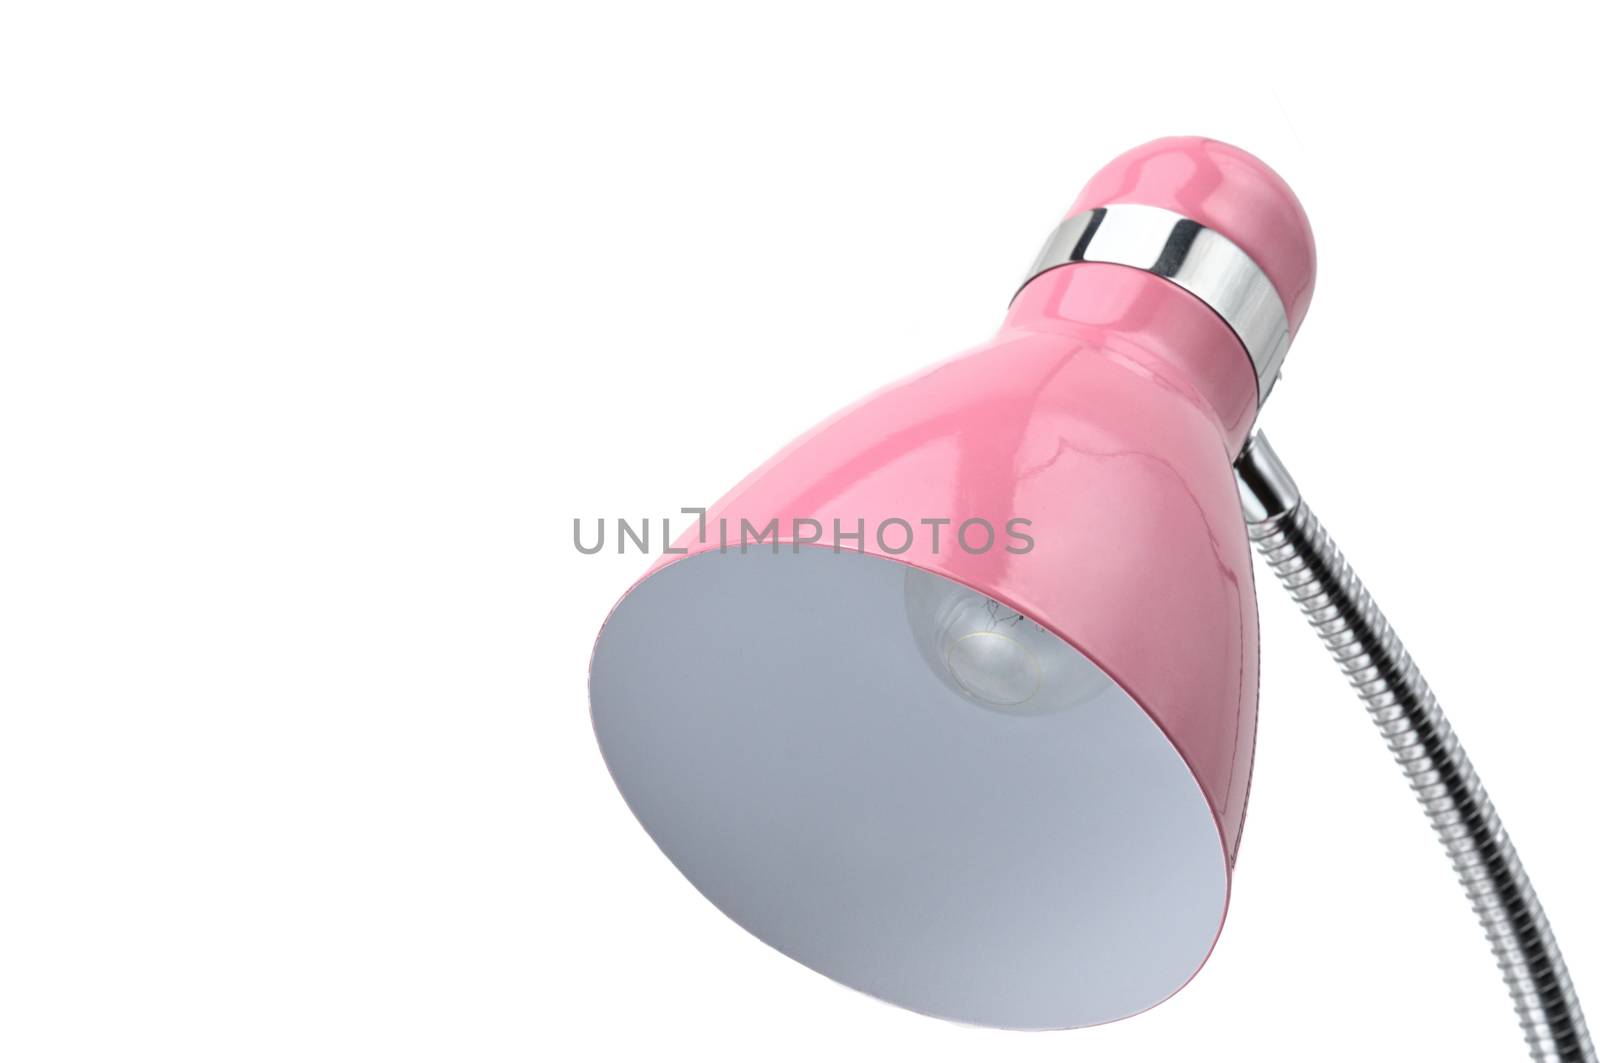 Pink table lamp on an isolated background by moviephoto